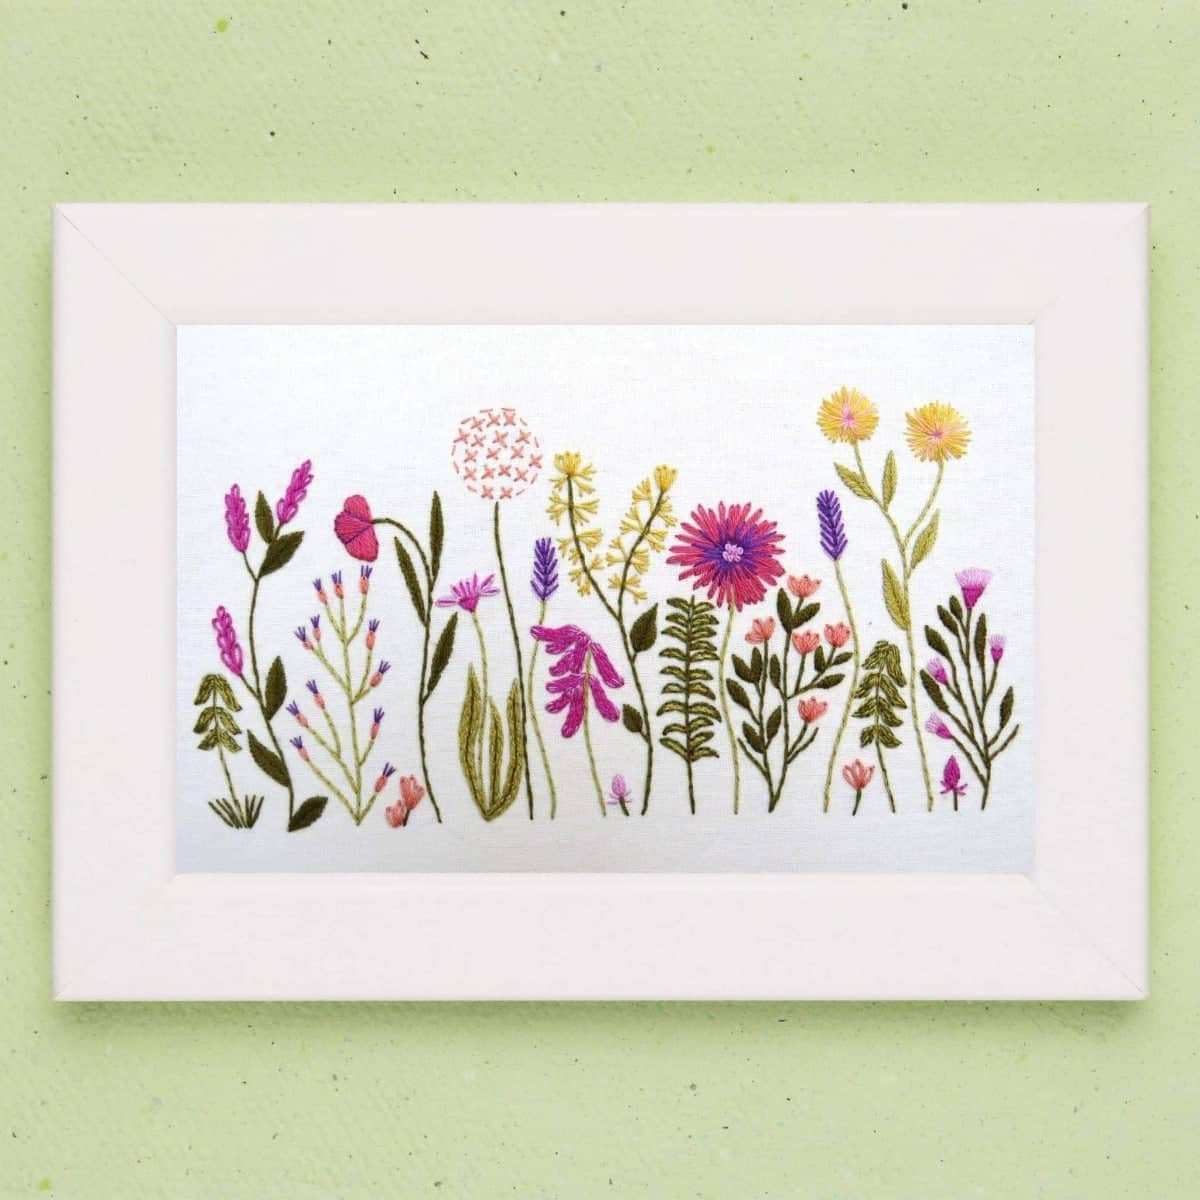 Meadow Flowers, Pre Printed Embroidery Fabric Panel PLUS PDF Pattern , Pre Printed Fabric Pattern , StitchDoodles , bird embroidery, Embroidery, embroidery hoop, embroidery hoop kit, embroidery kit for adults, embroidery kit for beginers, embroidery kits for beginners, embroidery pattern, garden embroidery, hand embroidery, hand embroidery fabric, hand embroidery kit, hand embroidery seat frame, nurge embroidery hoop, PDF pattern, Printed Pattern , StitchDoodles , shop.stitchdoodles.com